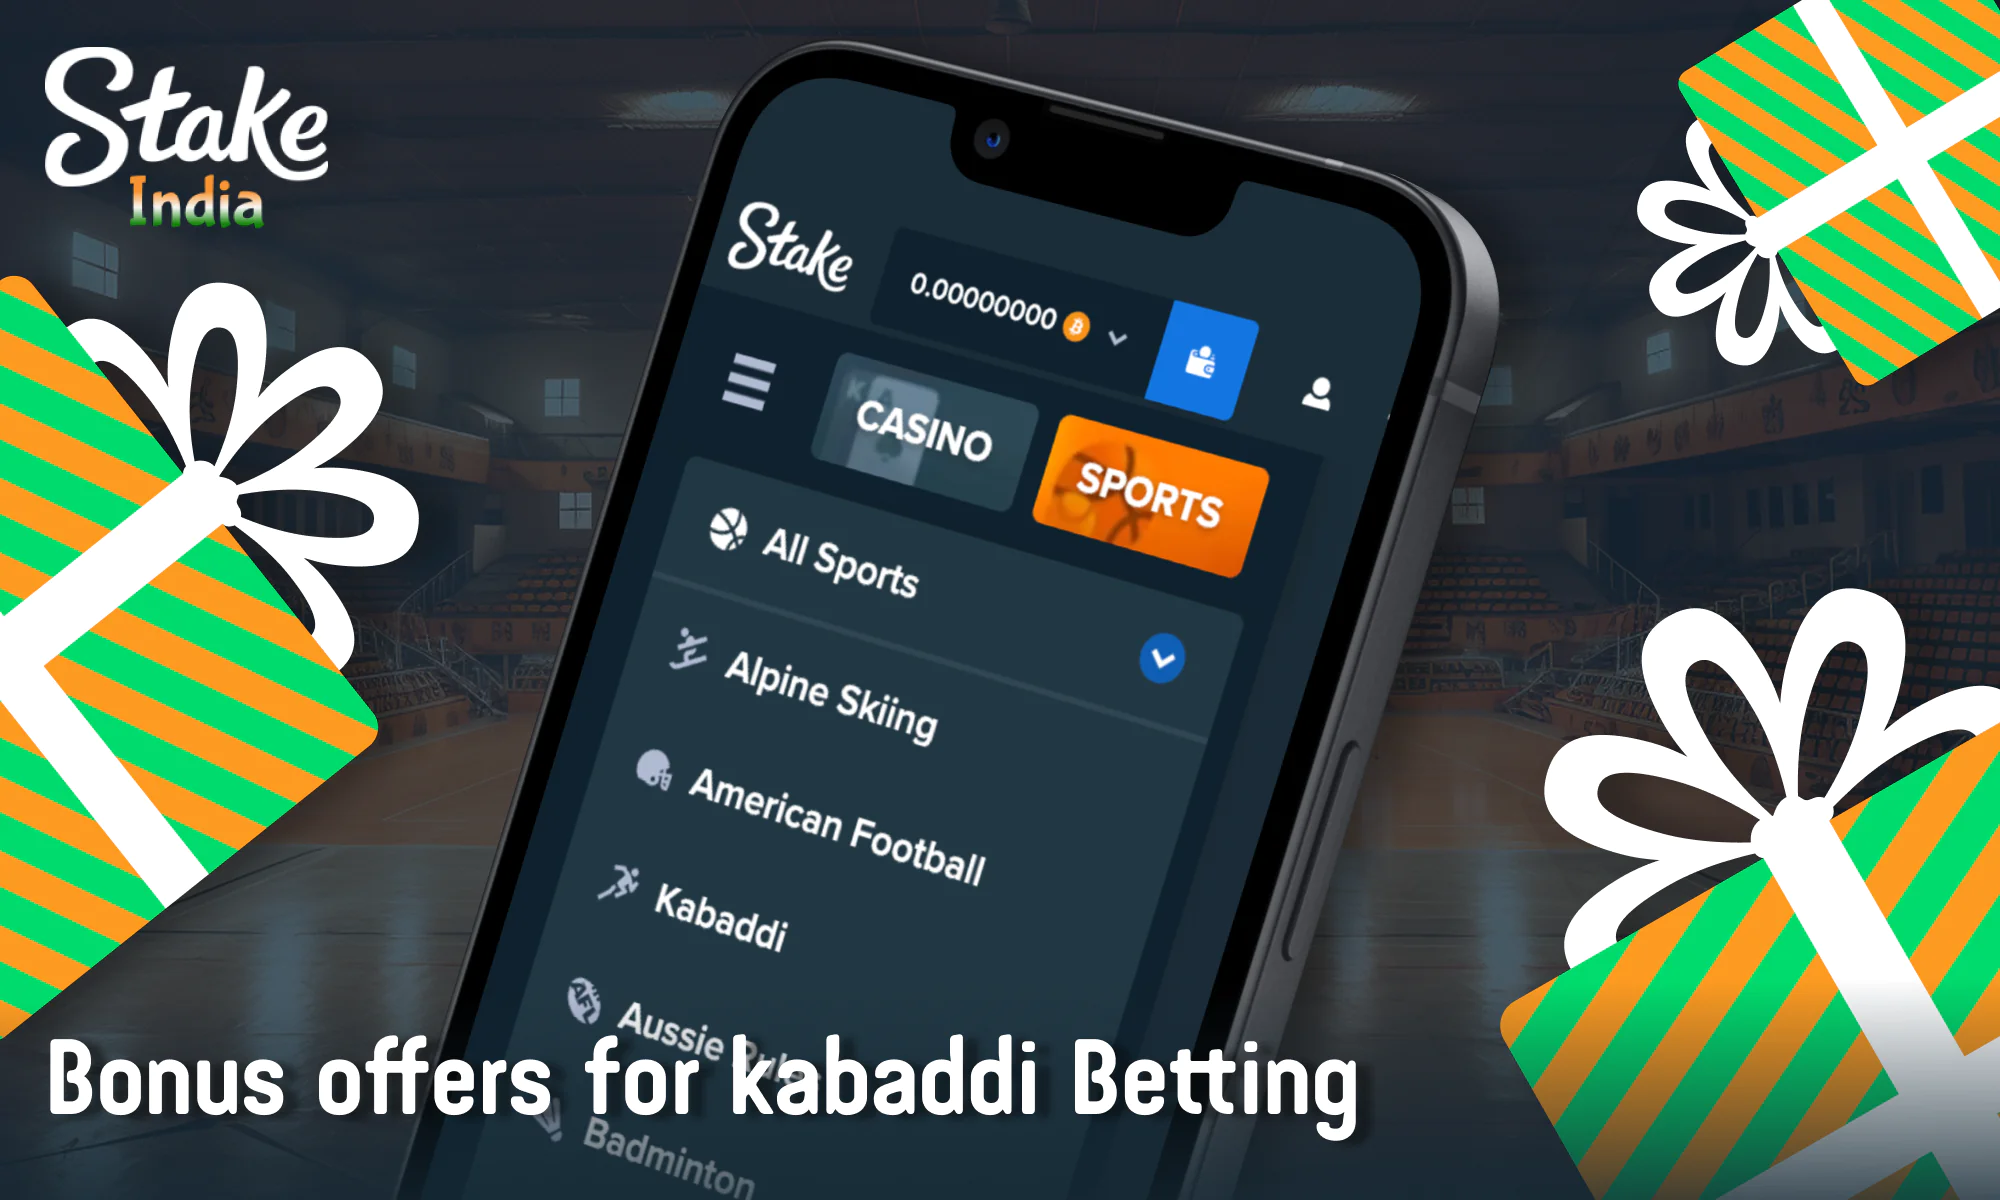 Bonuses for Indian bettors at Stake